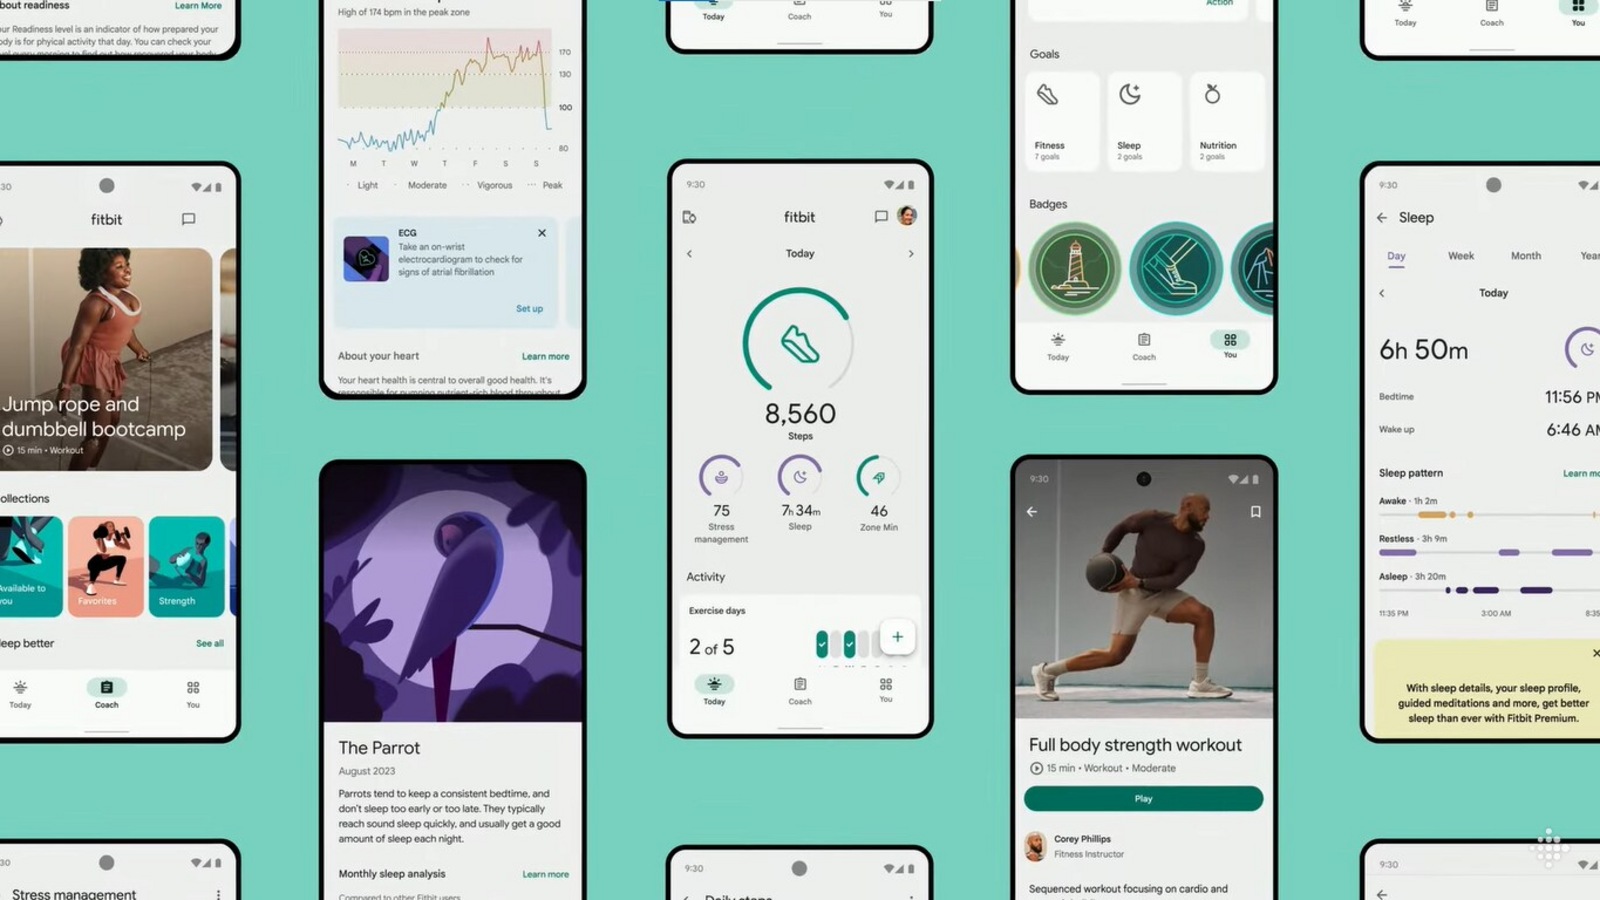 Fitbit app gets a major redesign! Know what’s new – Coach tab, customization, more